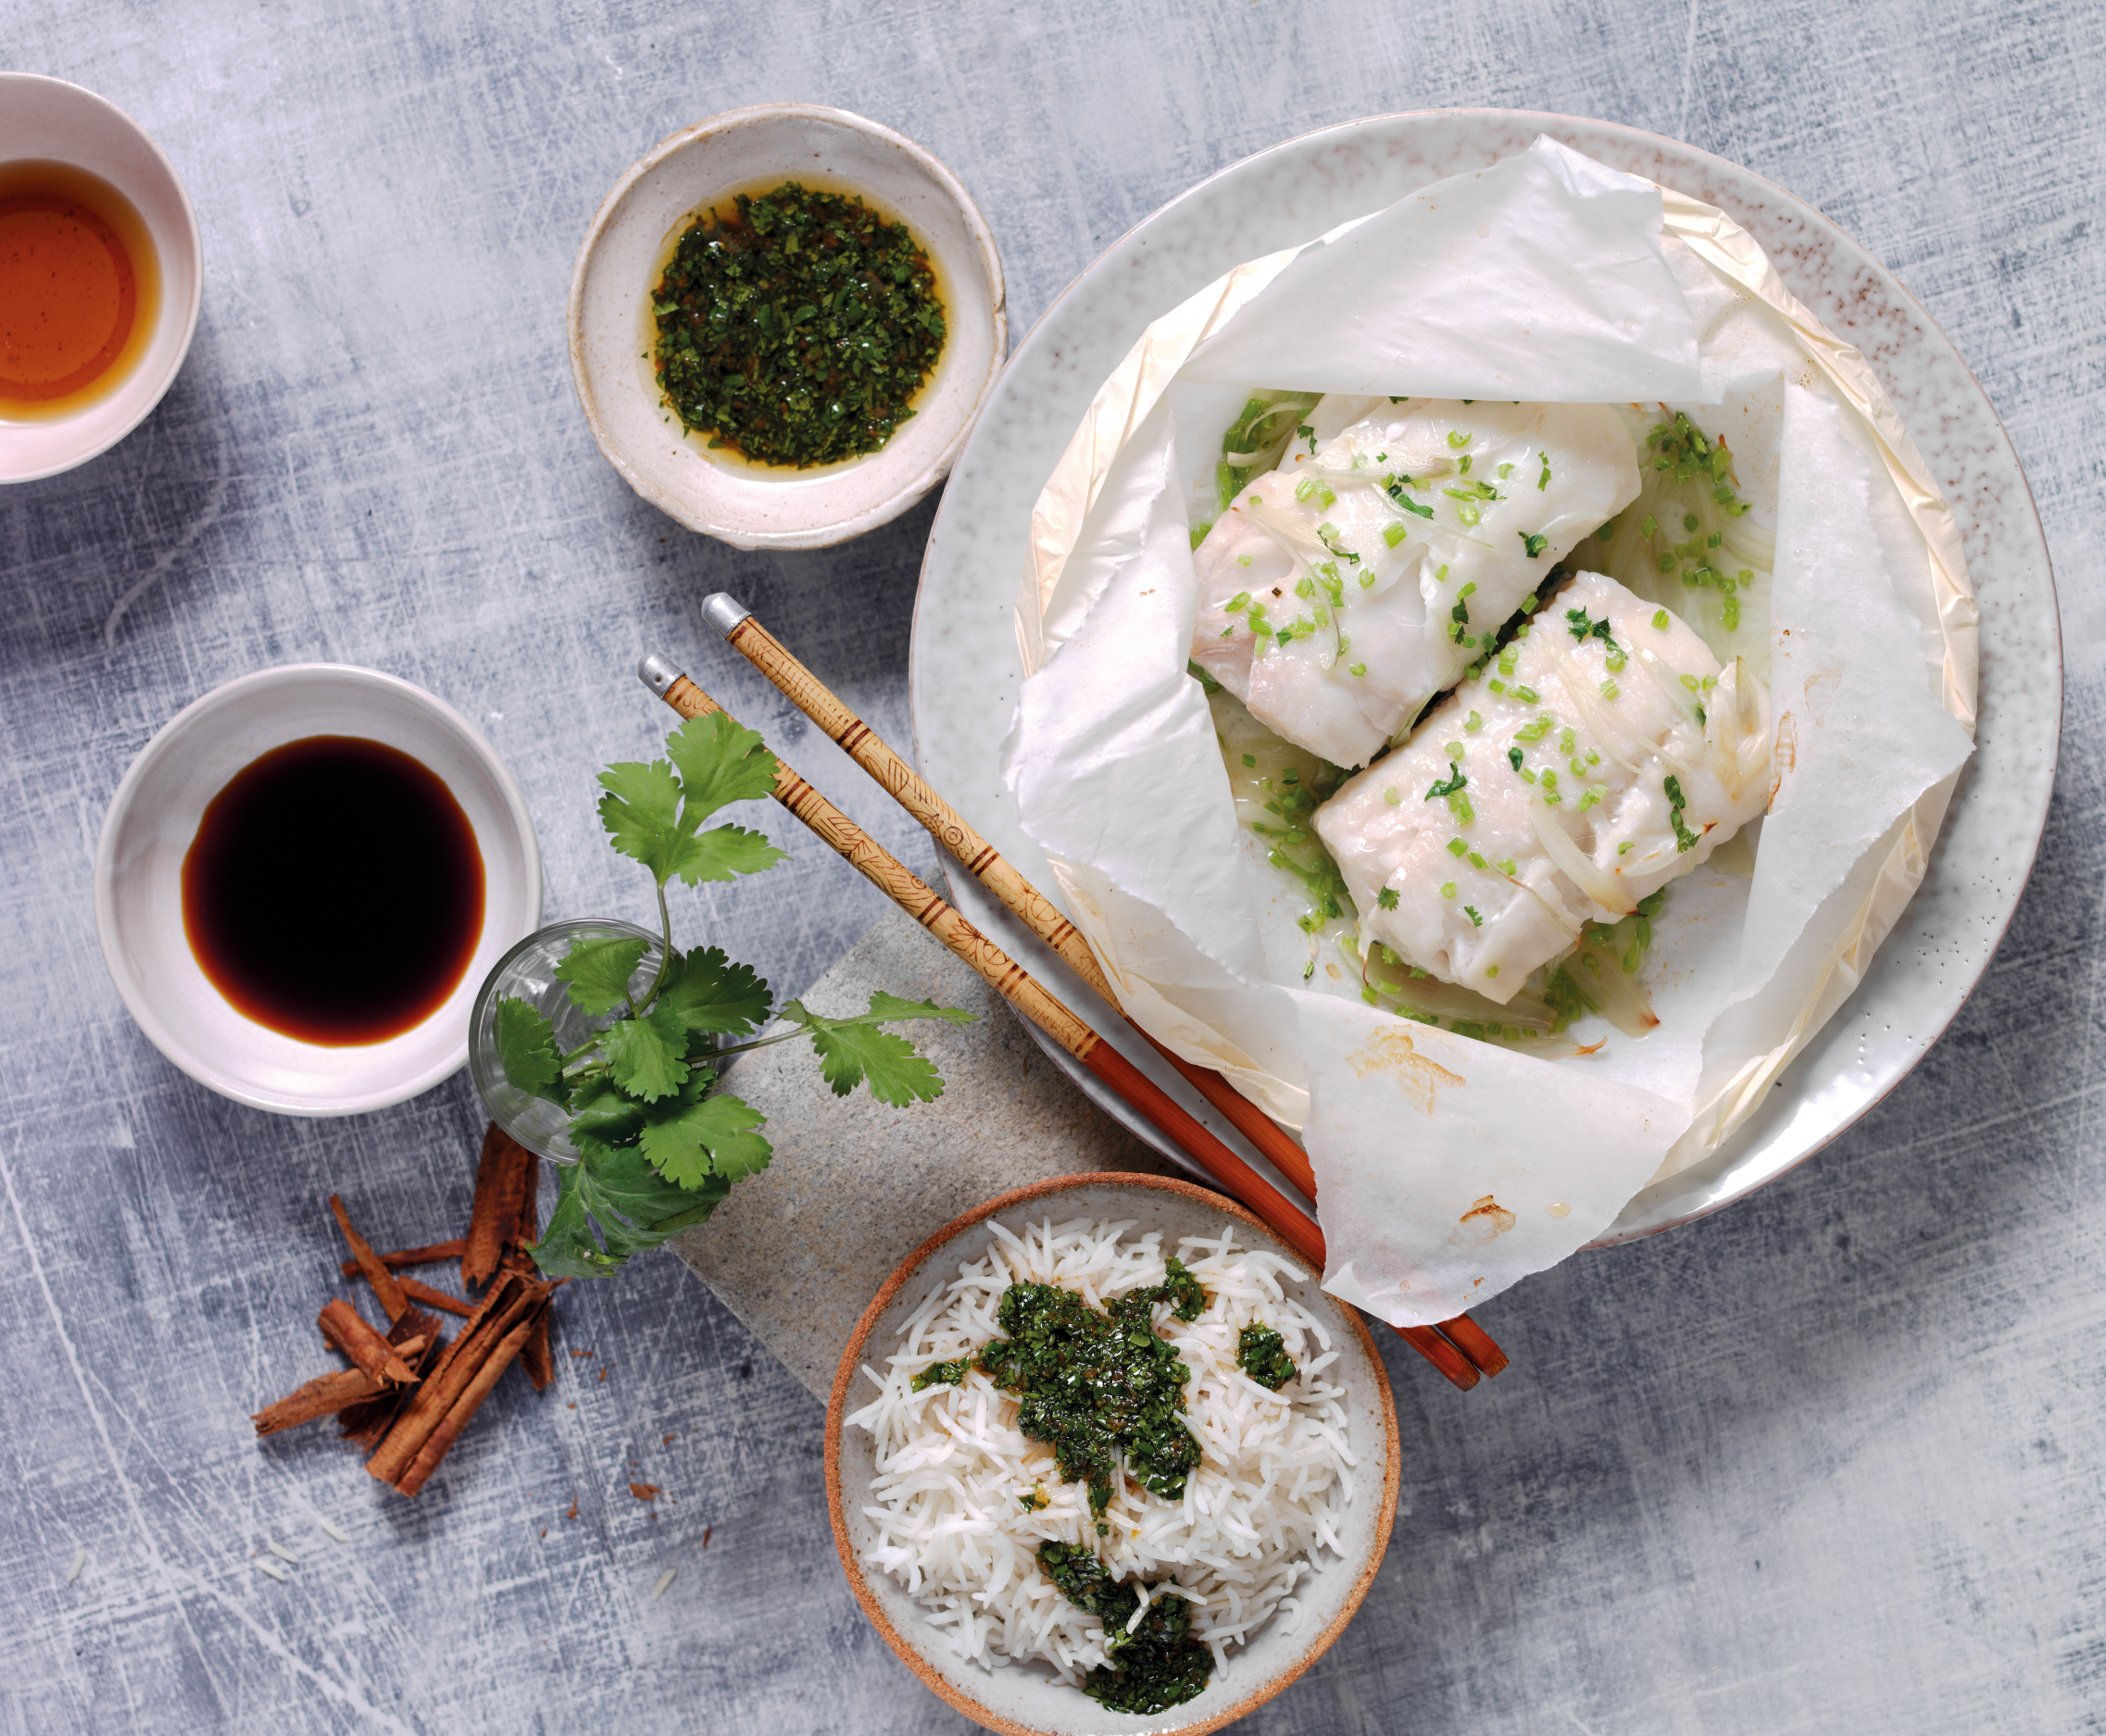 Michel Roux Jr's Norwegian haddock, baked with ginger and coriander, with steamed basmati rice